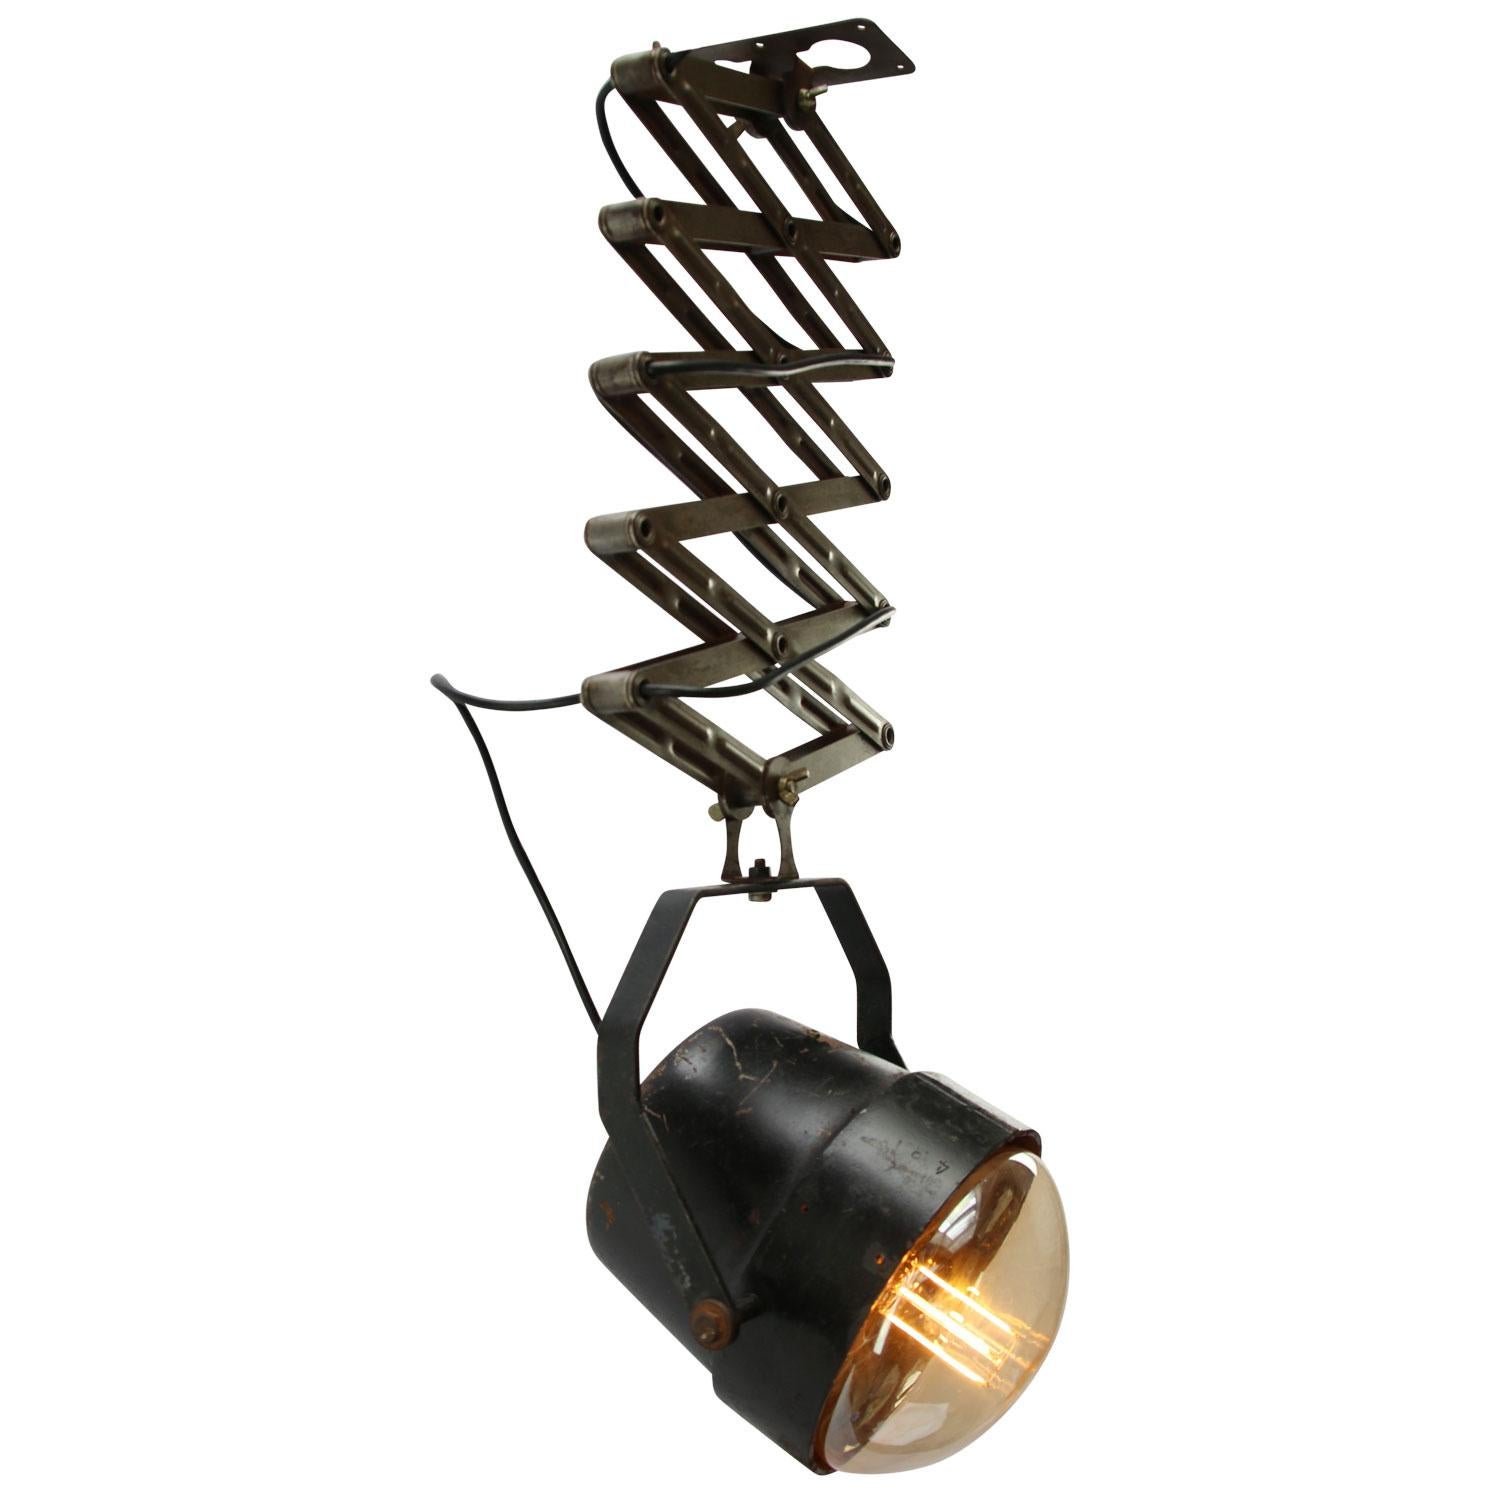 Scissor spring with Industrial hanging lamp
Measures: maximum length 140 cm, minimum length 62 cm

excluding bulbs

Weight: 7.00 kg / 15.4 lb

Priced per individual item. All lamps have been made suitable by international standards for incandescent